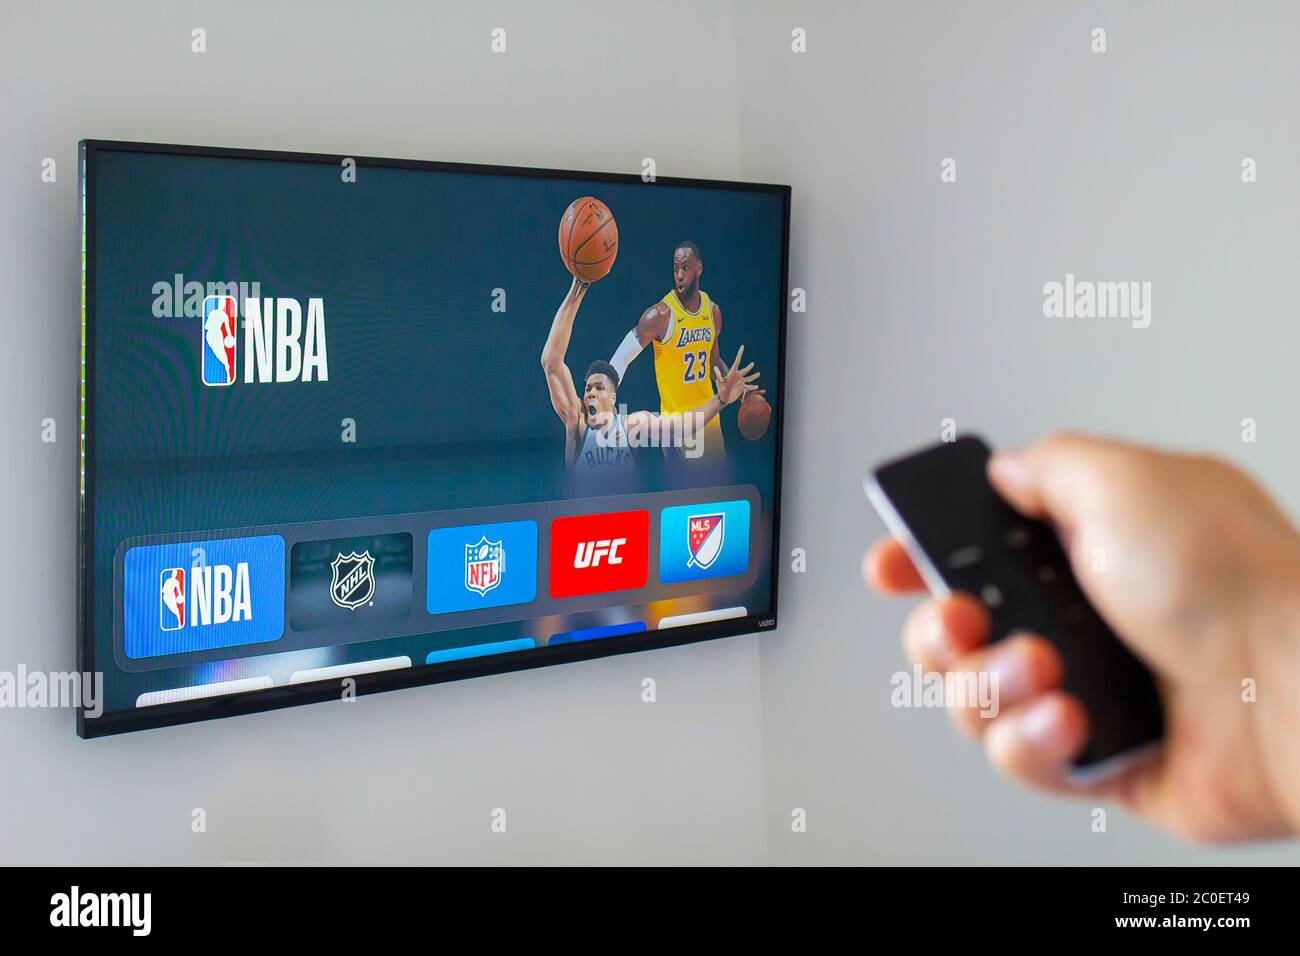 Calgary, AB, Canada. June 11, 2020. A person using an apple tv remote using  the NBA application. Concept watching American basketball Stock Photo -  Alamy